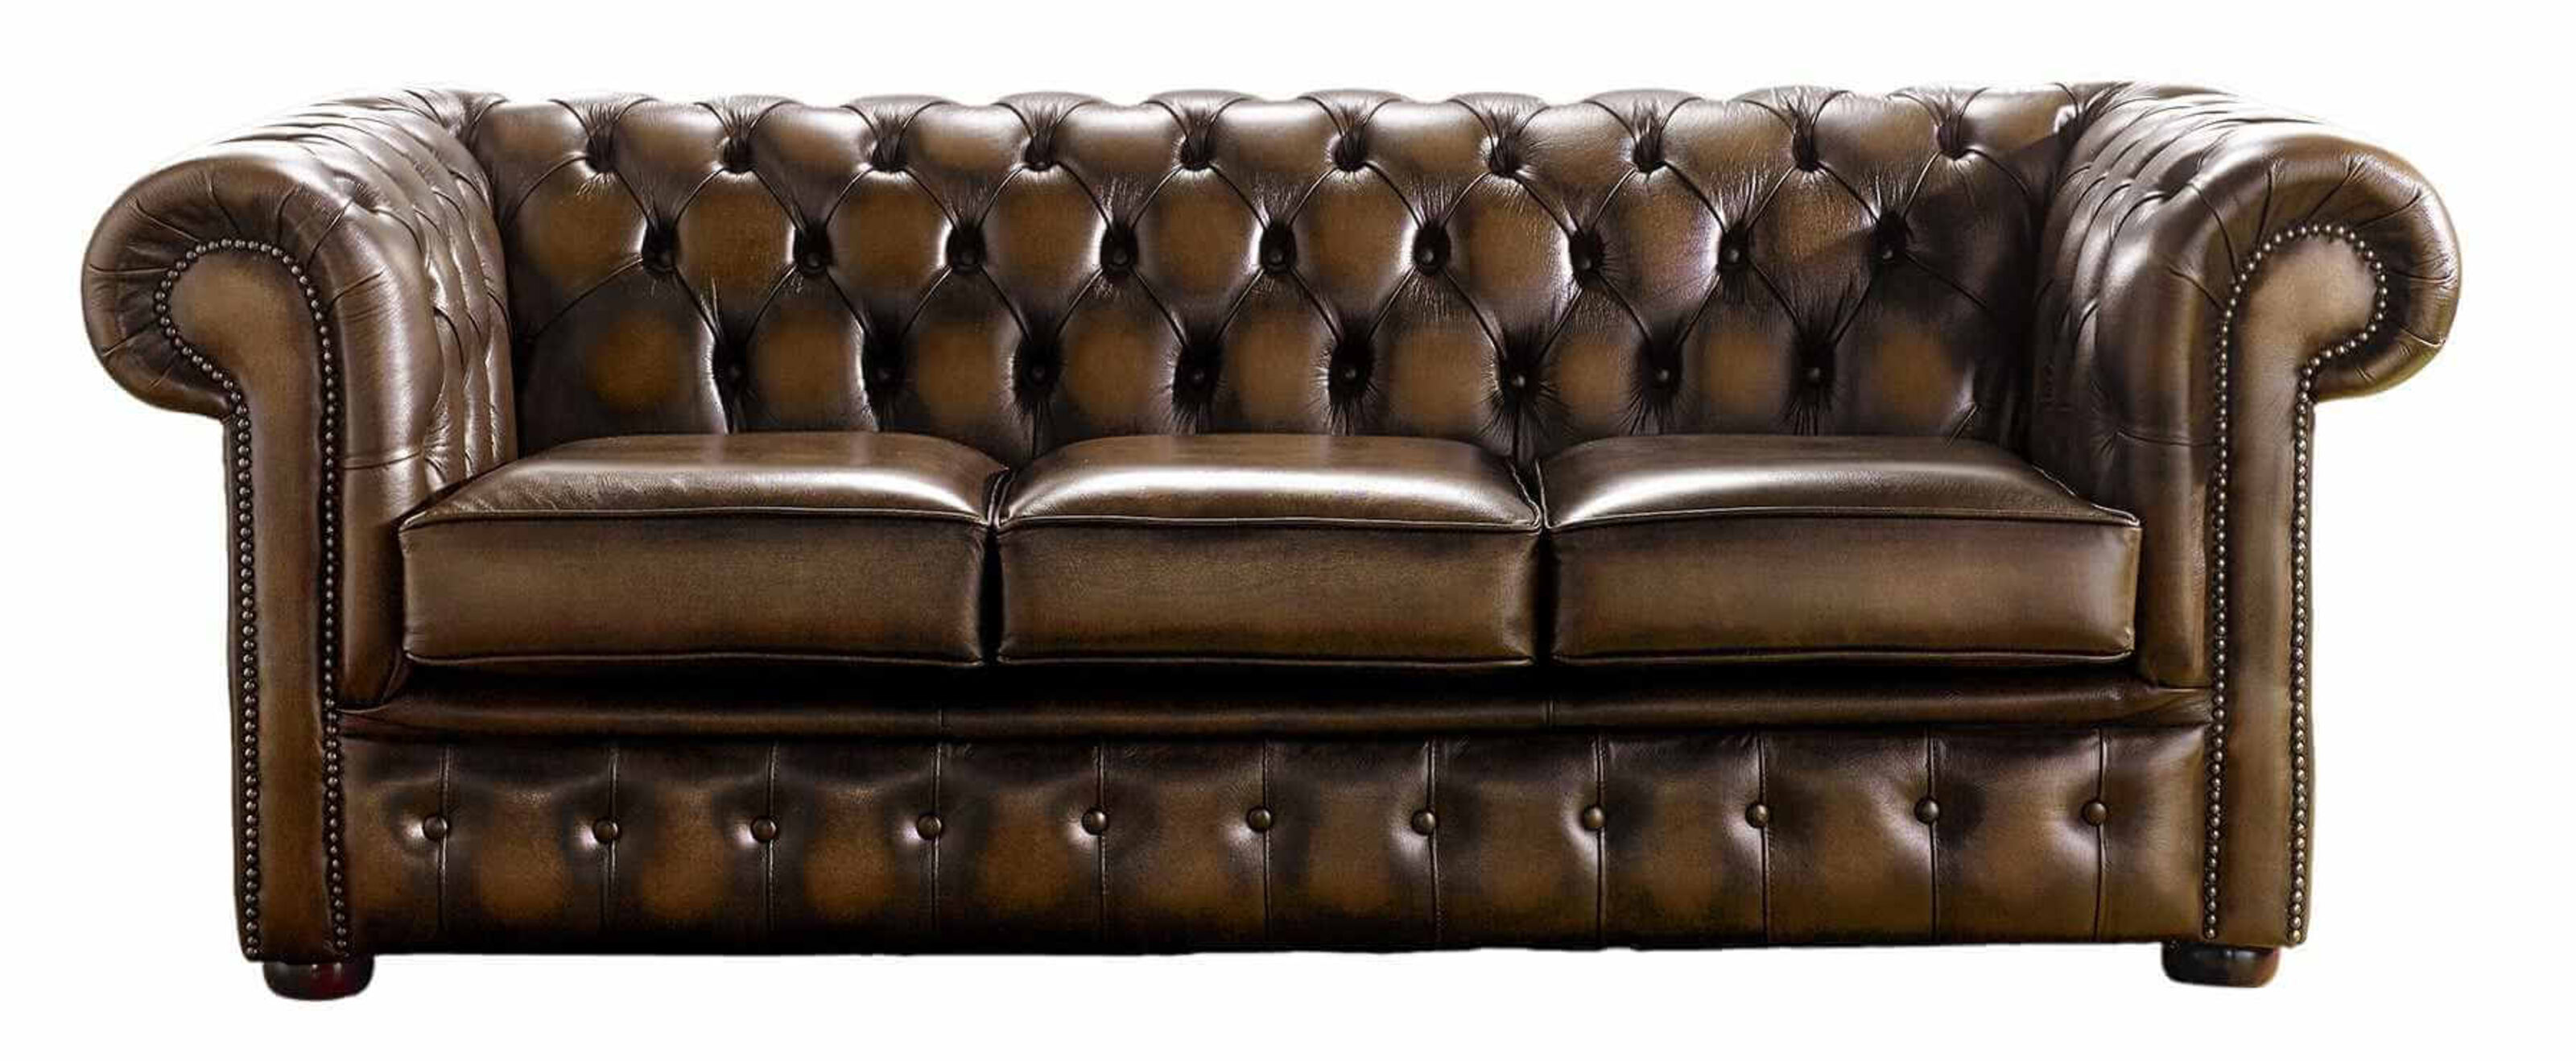 Discover the Timeless Elegance of a Wing Chair Leather Sofa  %Post Title